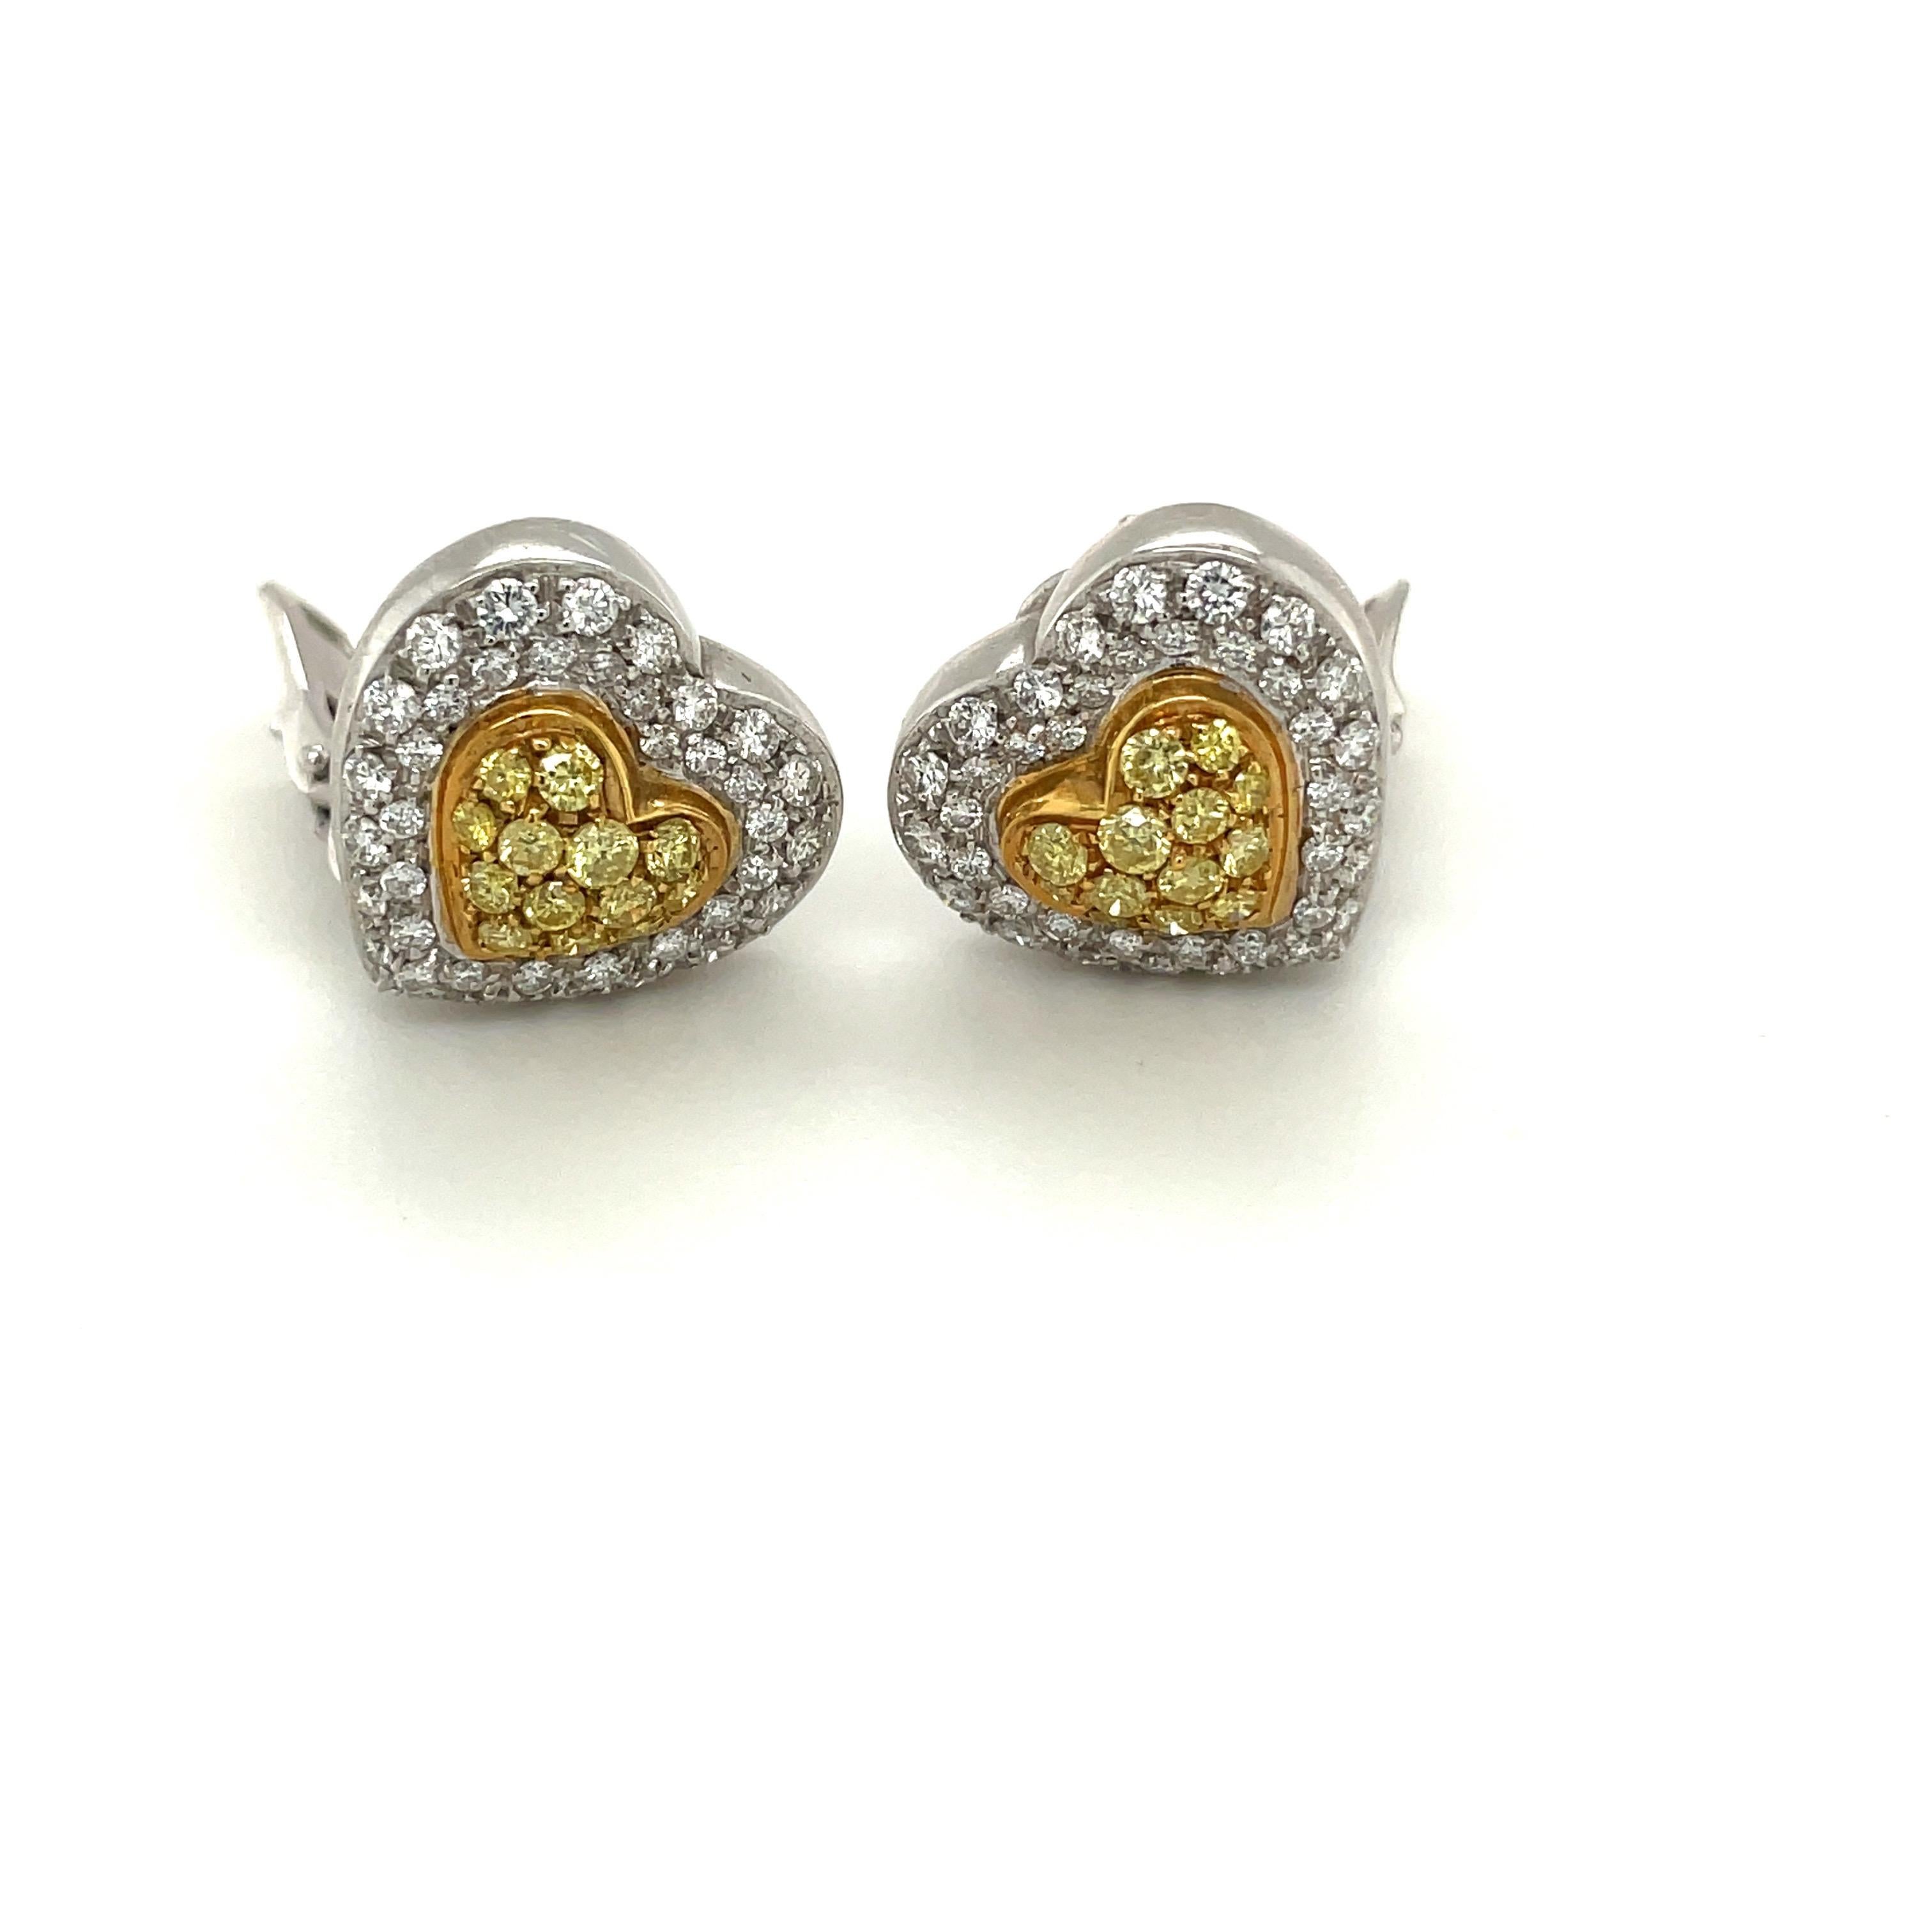 Sure to make your heart flutter, these charming heart earring are set in 18K yellow and white gold. Featuring 0.95cts of brilliant white diamonds, and 0.64cts of exquisite yellow diamonds. The earrings measure approximately 5/8